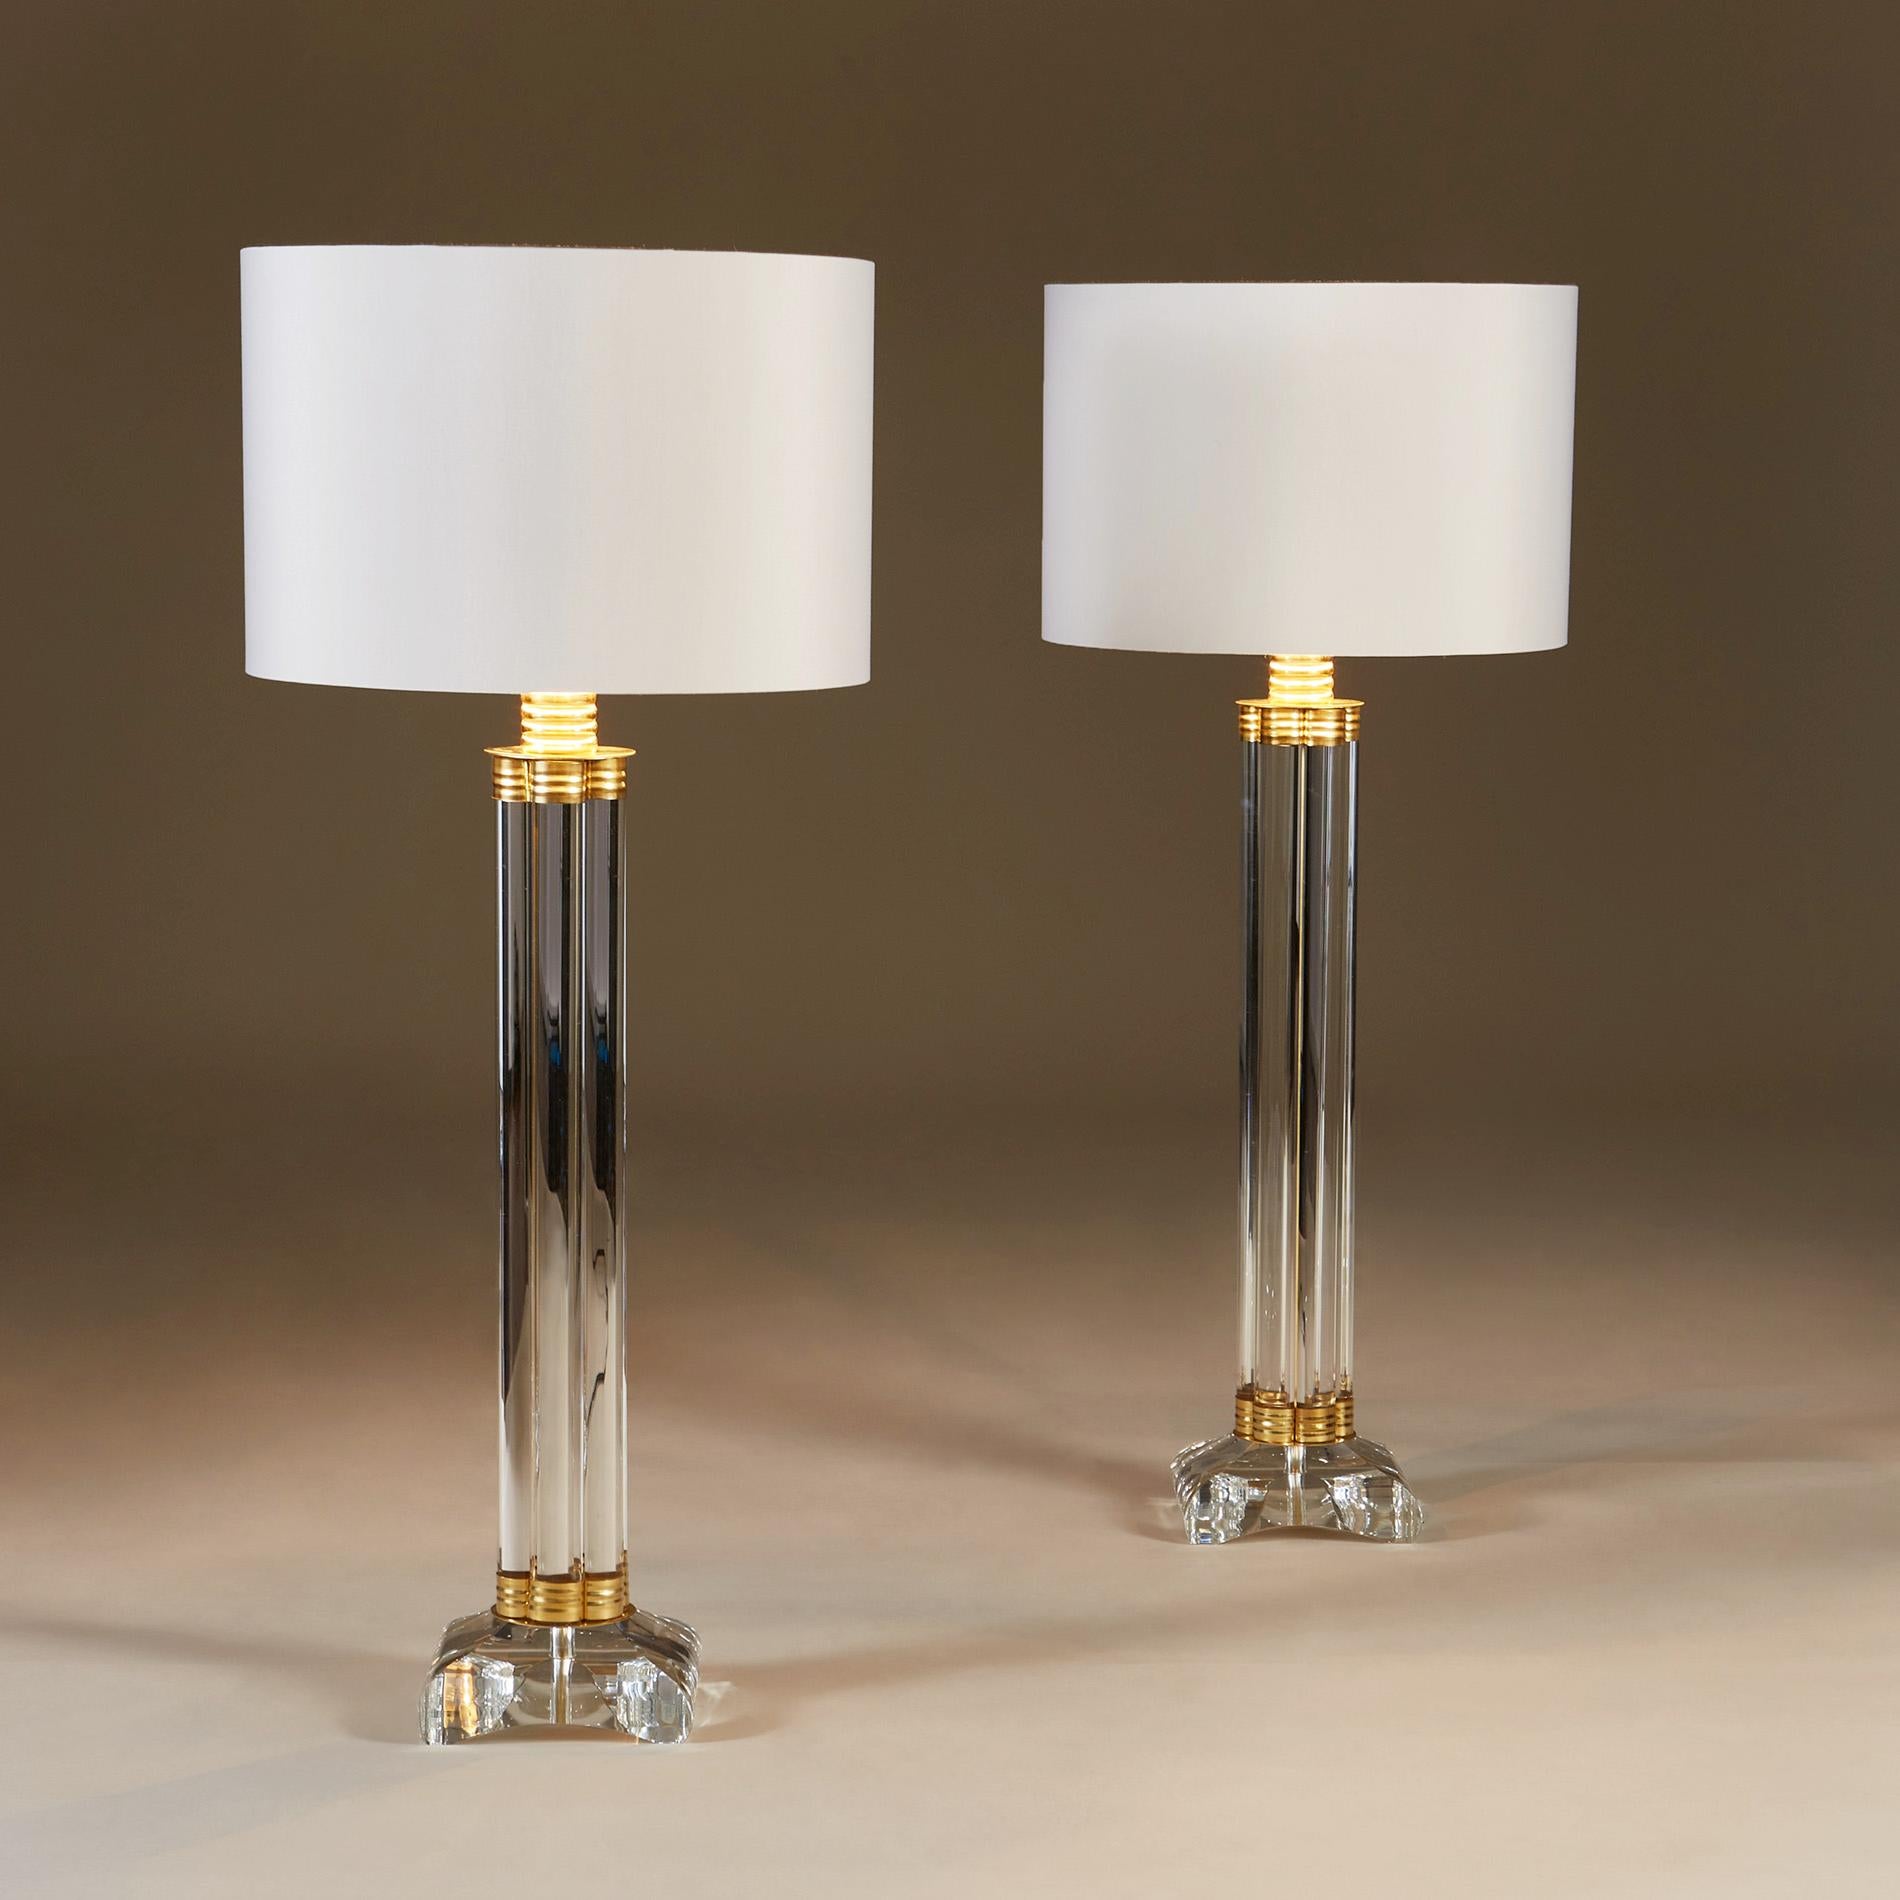 Striking pair of table lamps each made of six vertical glass rods held together at the top and bottom with decorative brass elements, standing on heavy square glass bases with rounded edges.
Height listed is without shades.